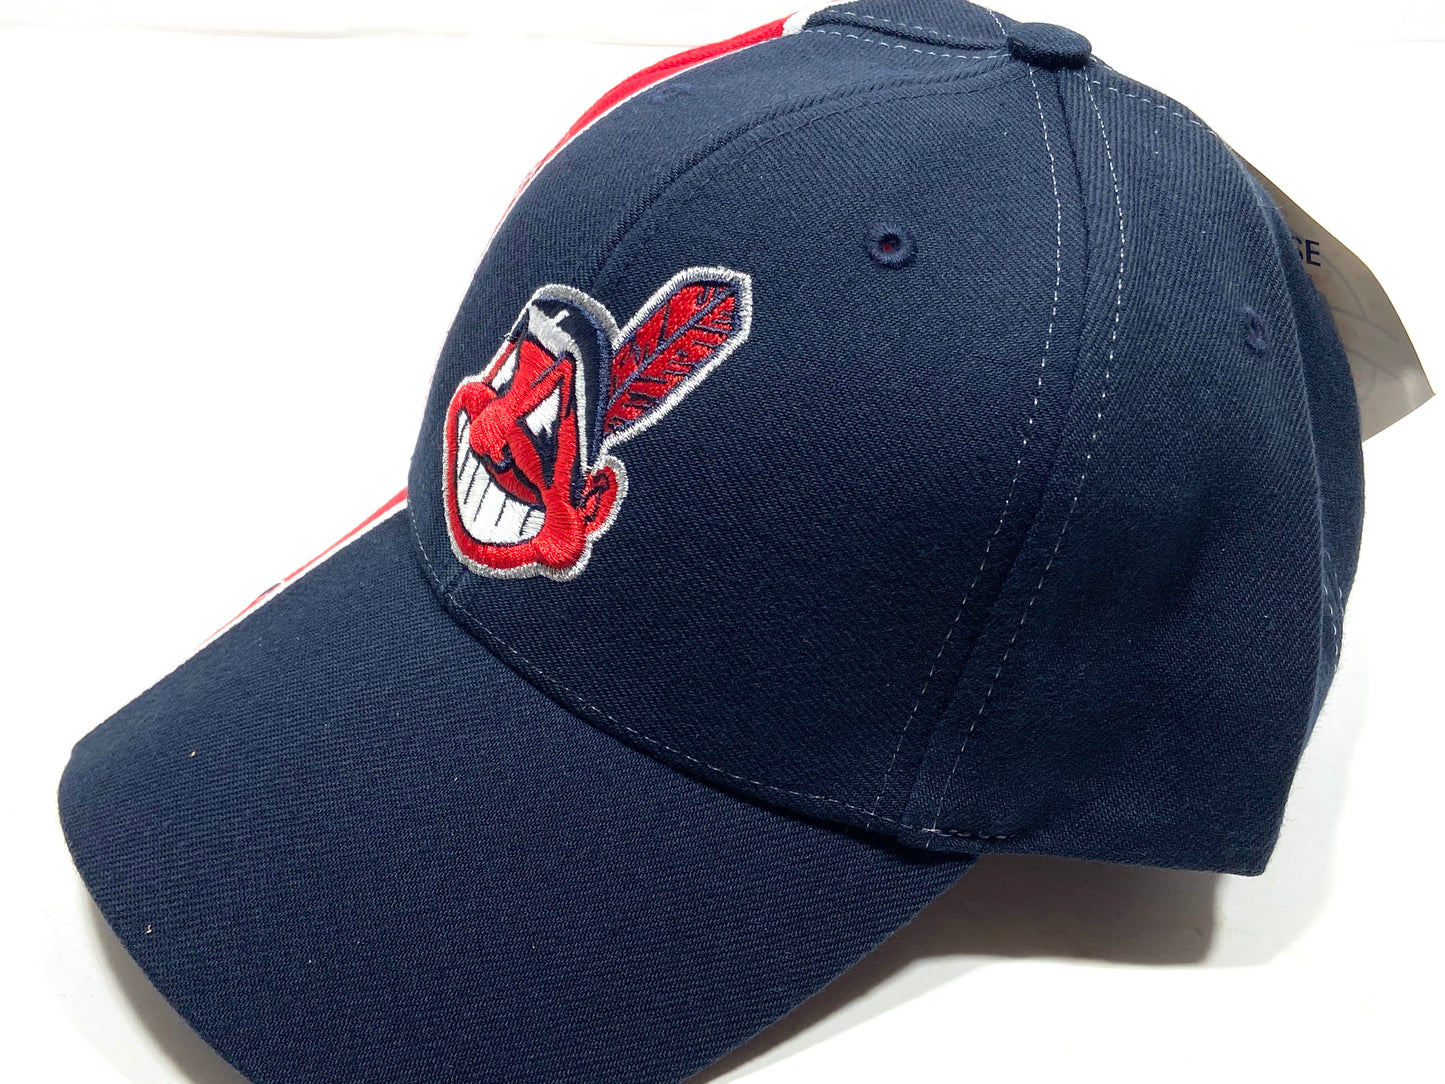 Cleveland Indians Vintage MLB Two-Tone 15% Wool Wahoo Hat By Twins Enterprise